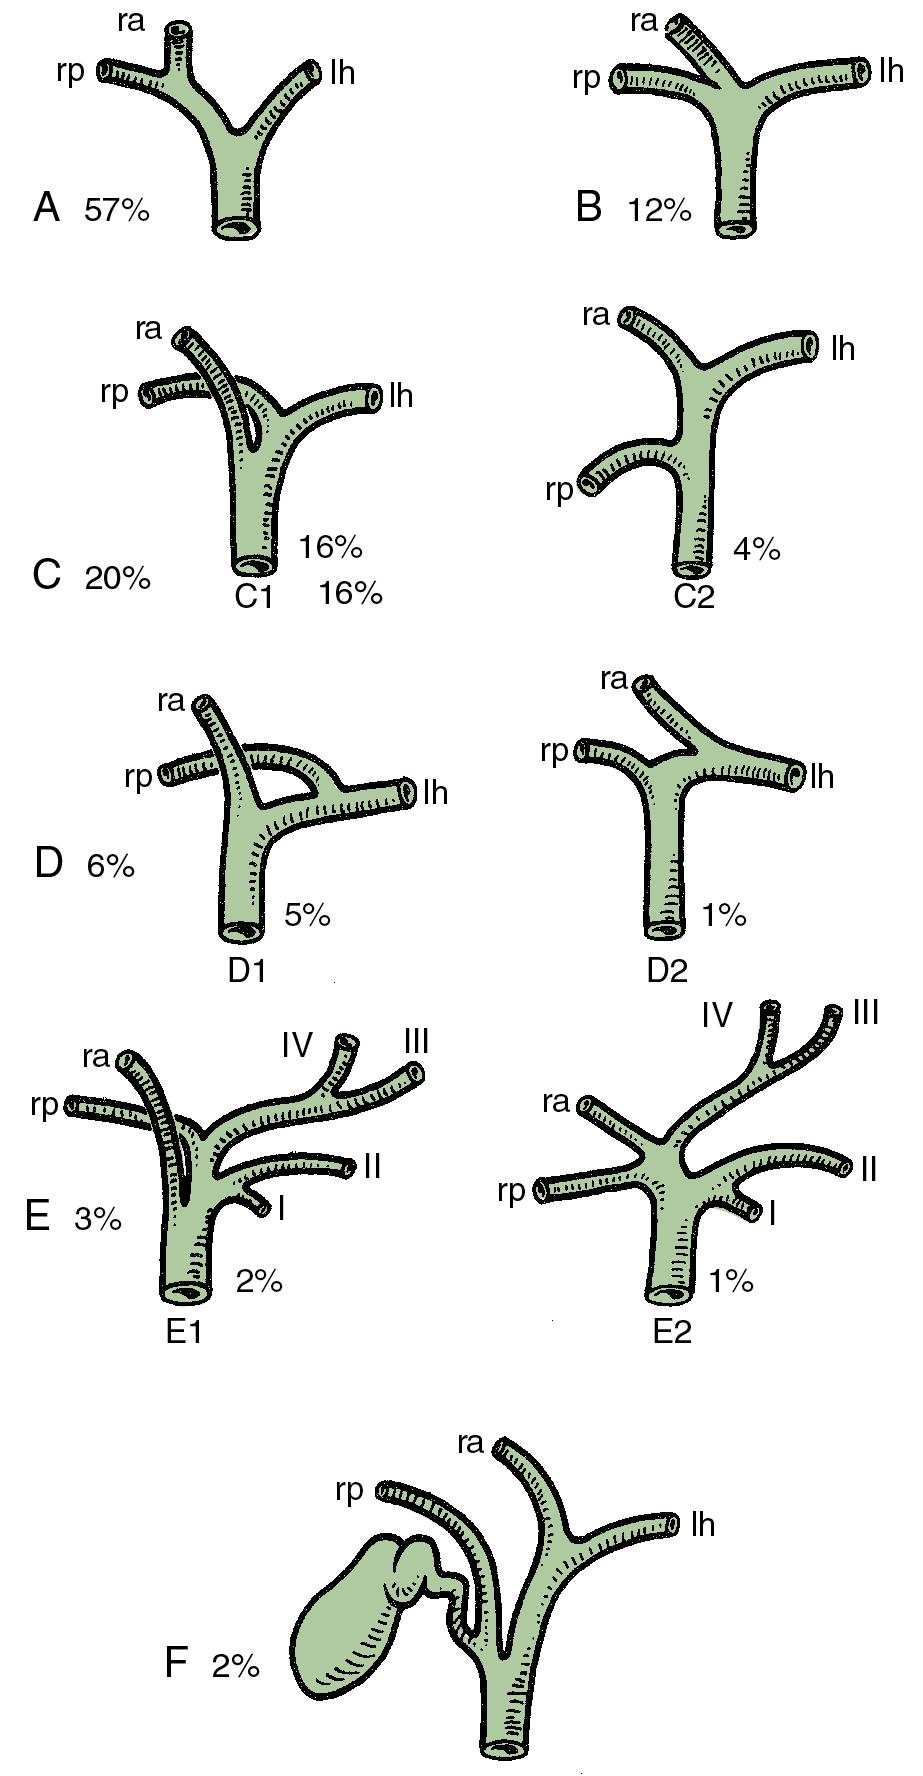 FIGURE 123.6, Variations of segment IV biliary drainage (see Chapter 2 ).